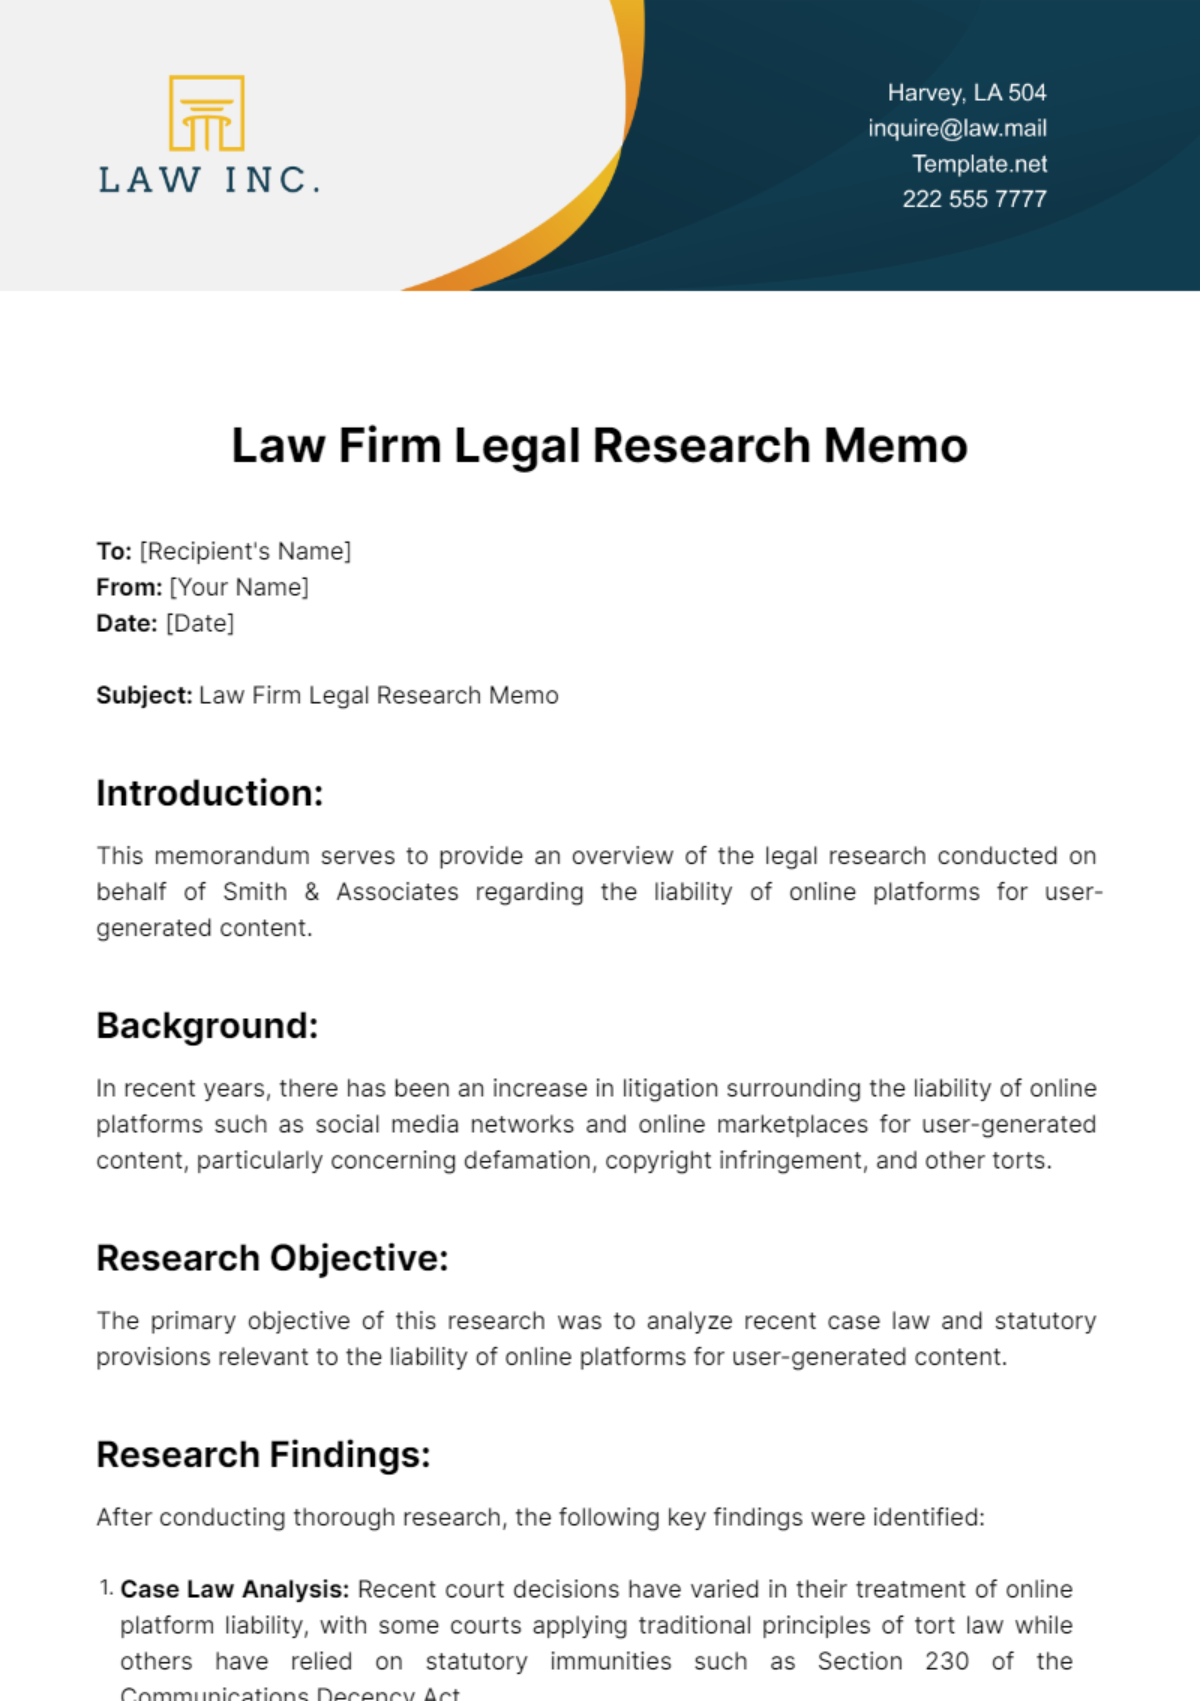 Free Law Firm Legal Research Memo Template